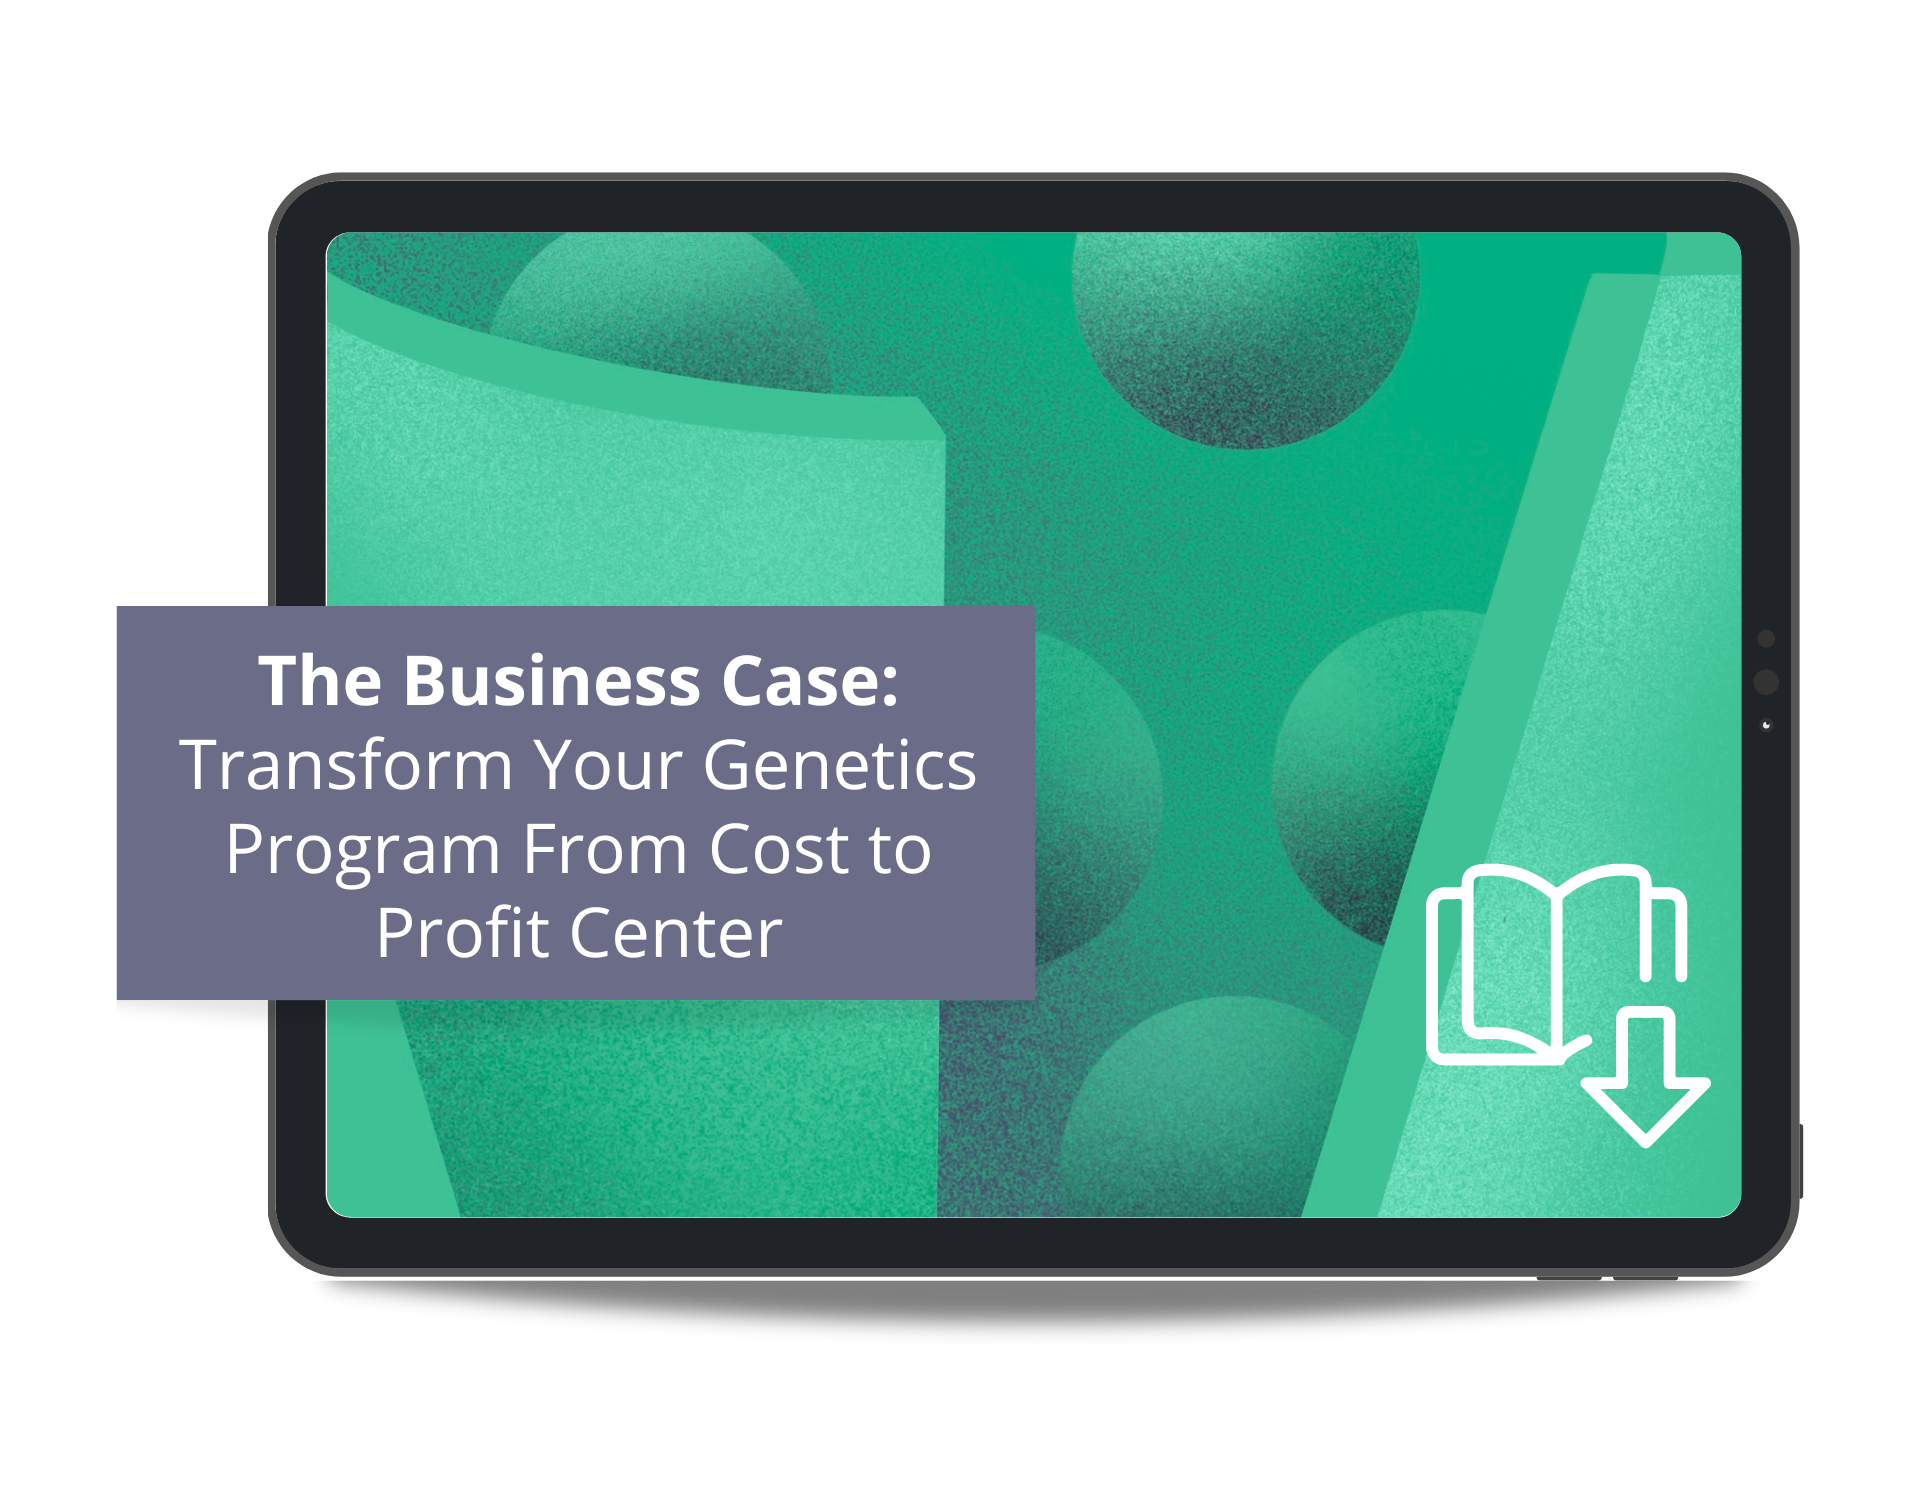 eBook Mockup - The Business Case